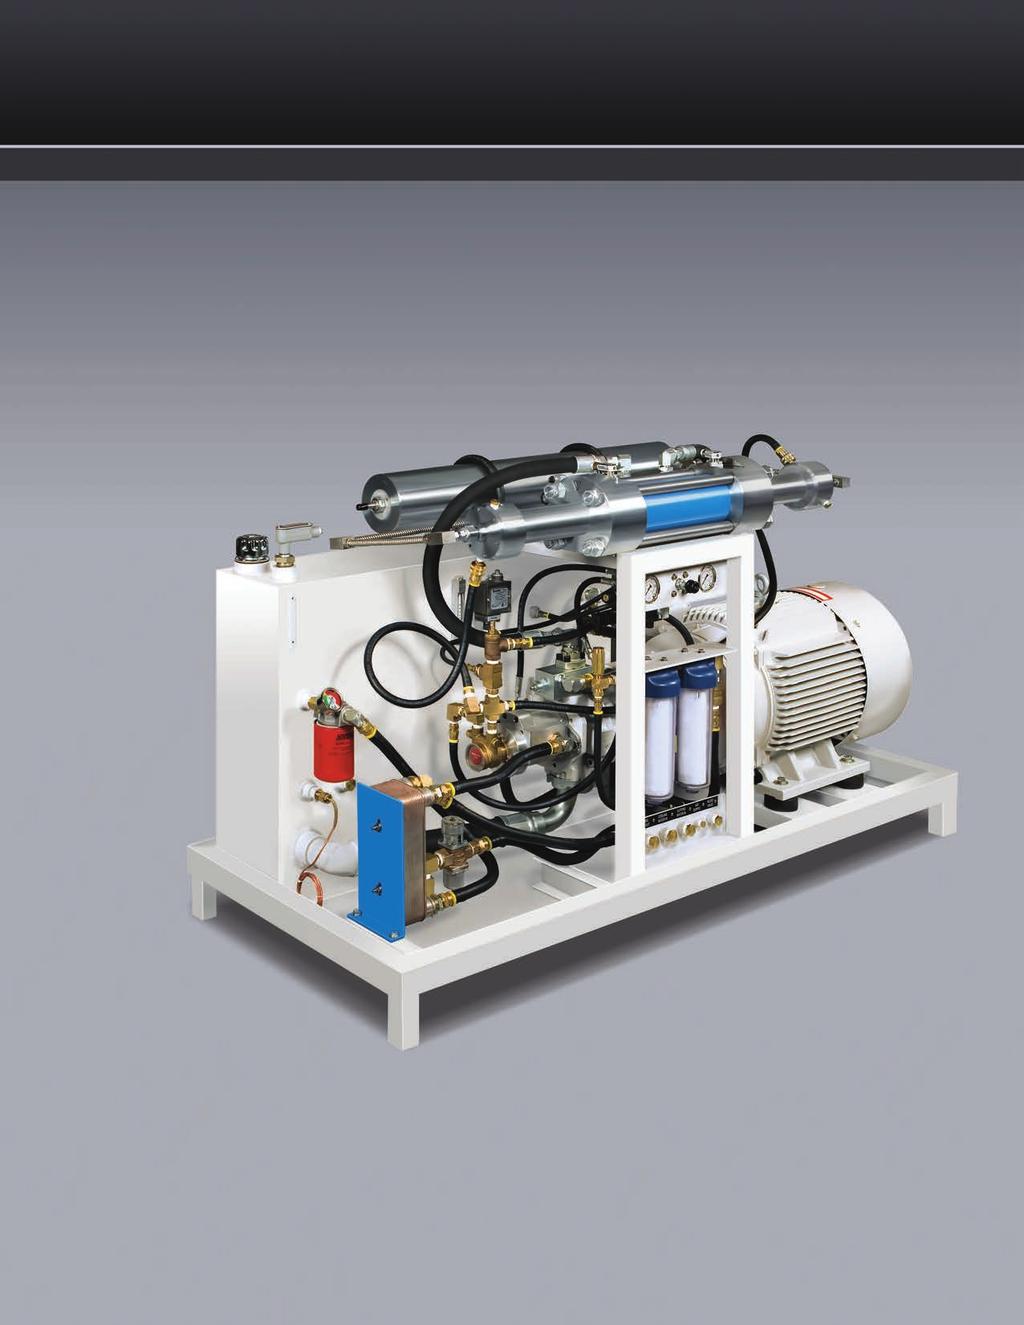 Oversized hydraulic reservoir has two large access doors for easy maintenance. Autoclave-brand highpressure tubing and fittings throughout the system provide maximum operation life. Large, 1.